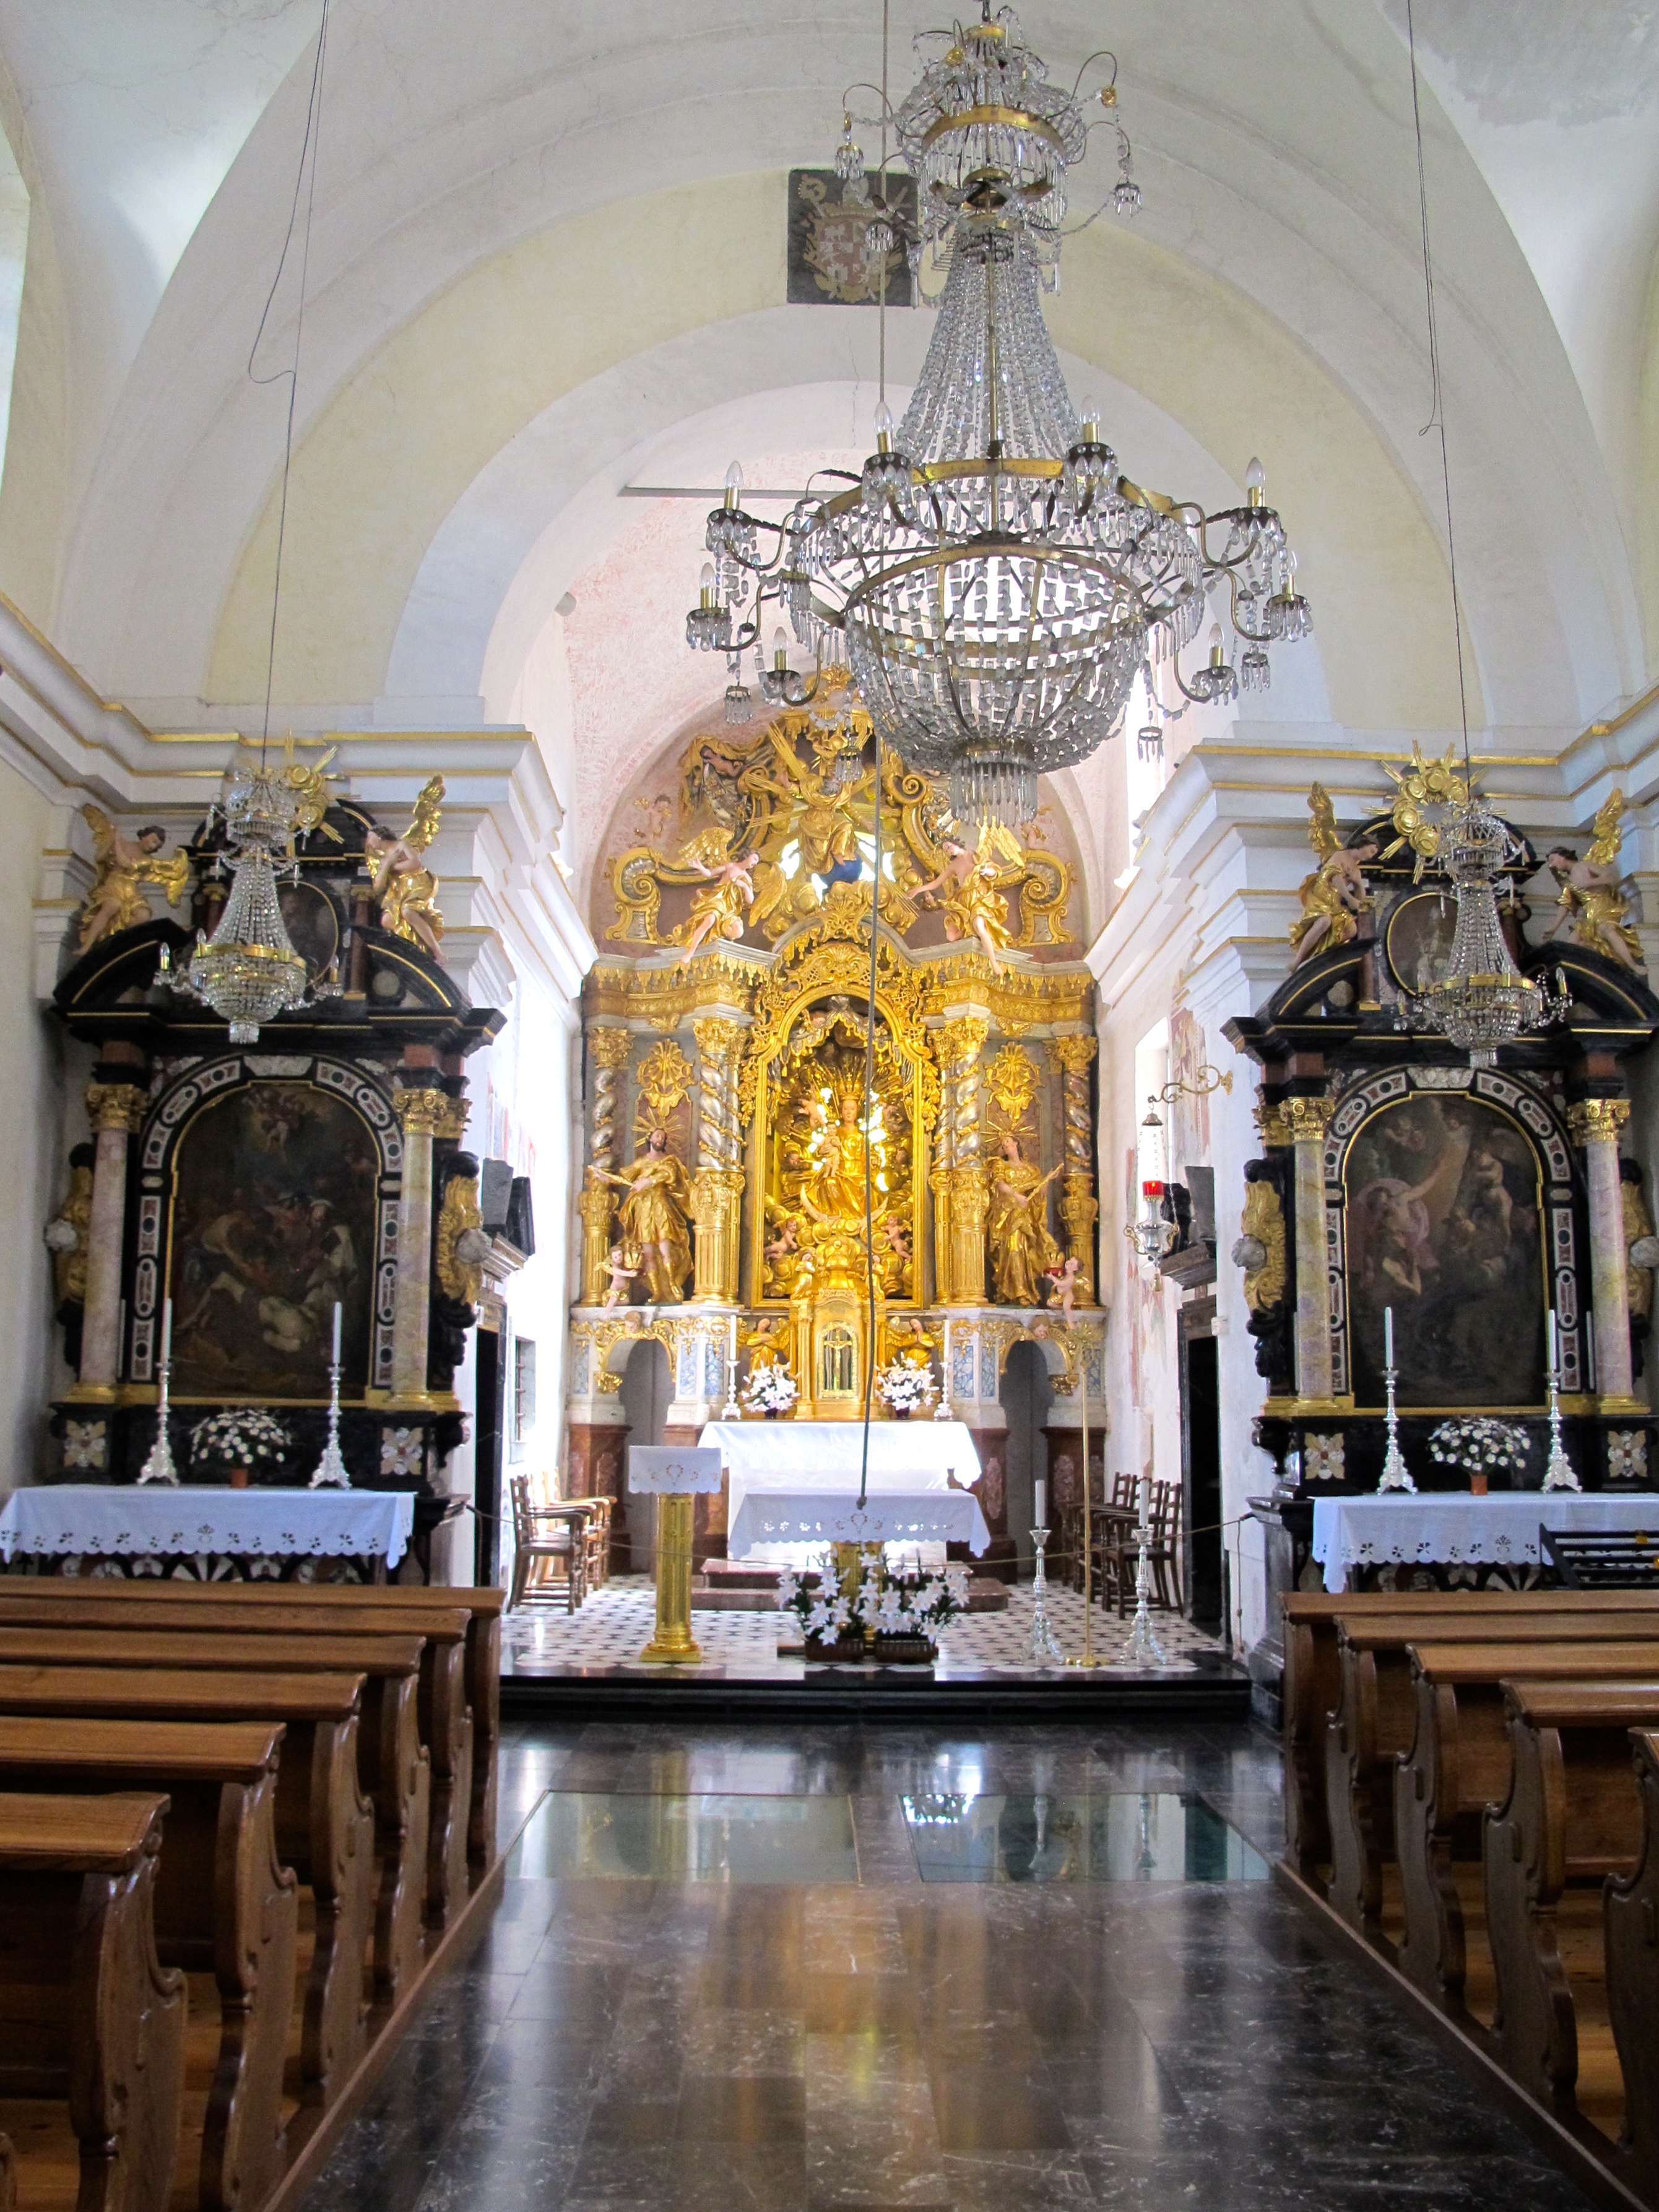 The main altar at the Church of the Assumption was carved in 1747.